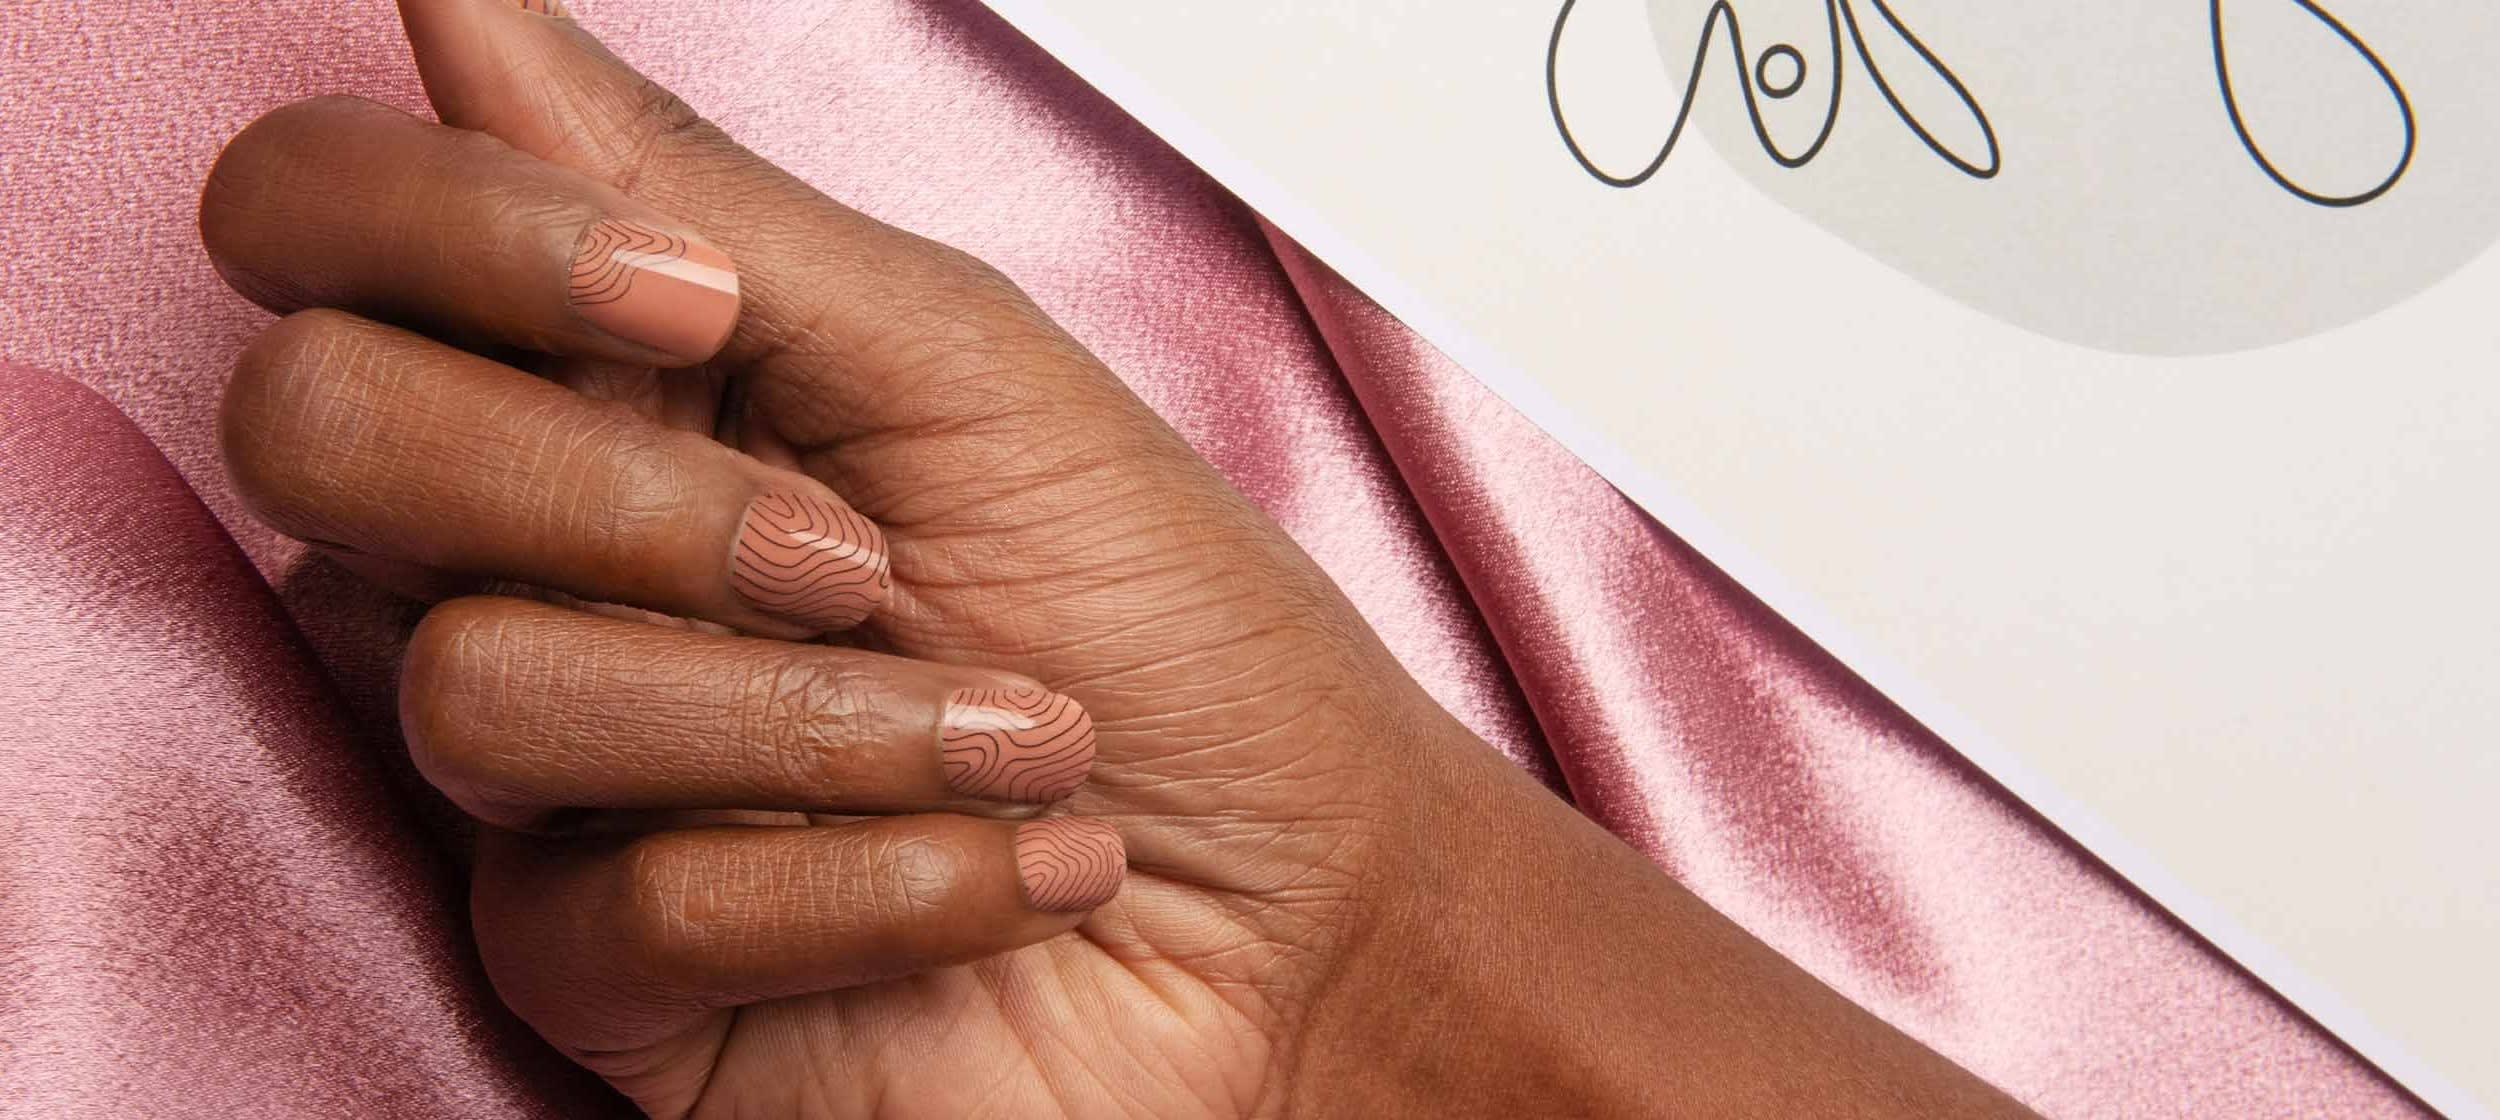 9. Florida Set to Host Color Street Nail Convention in 2024 - wide 3